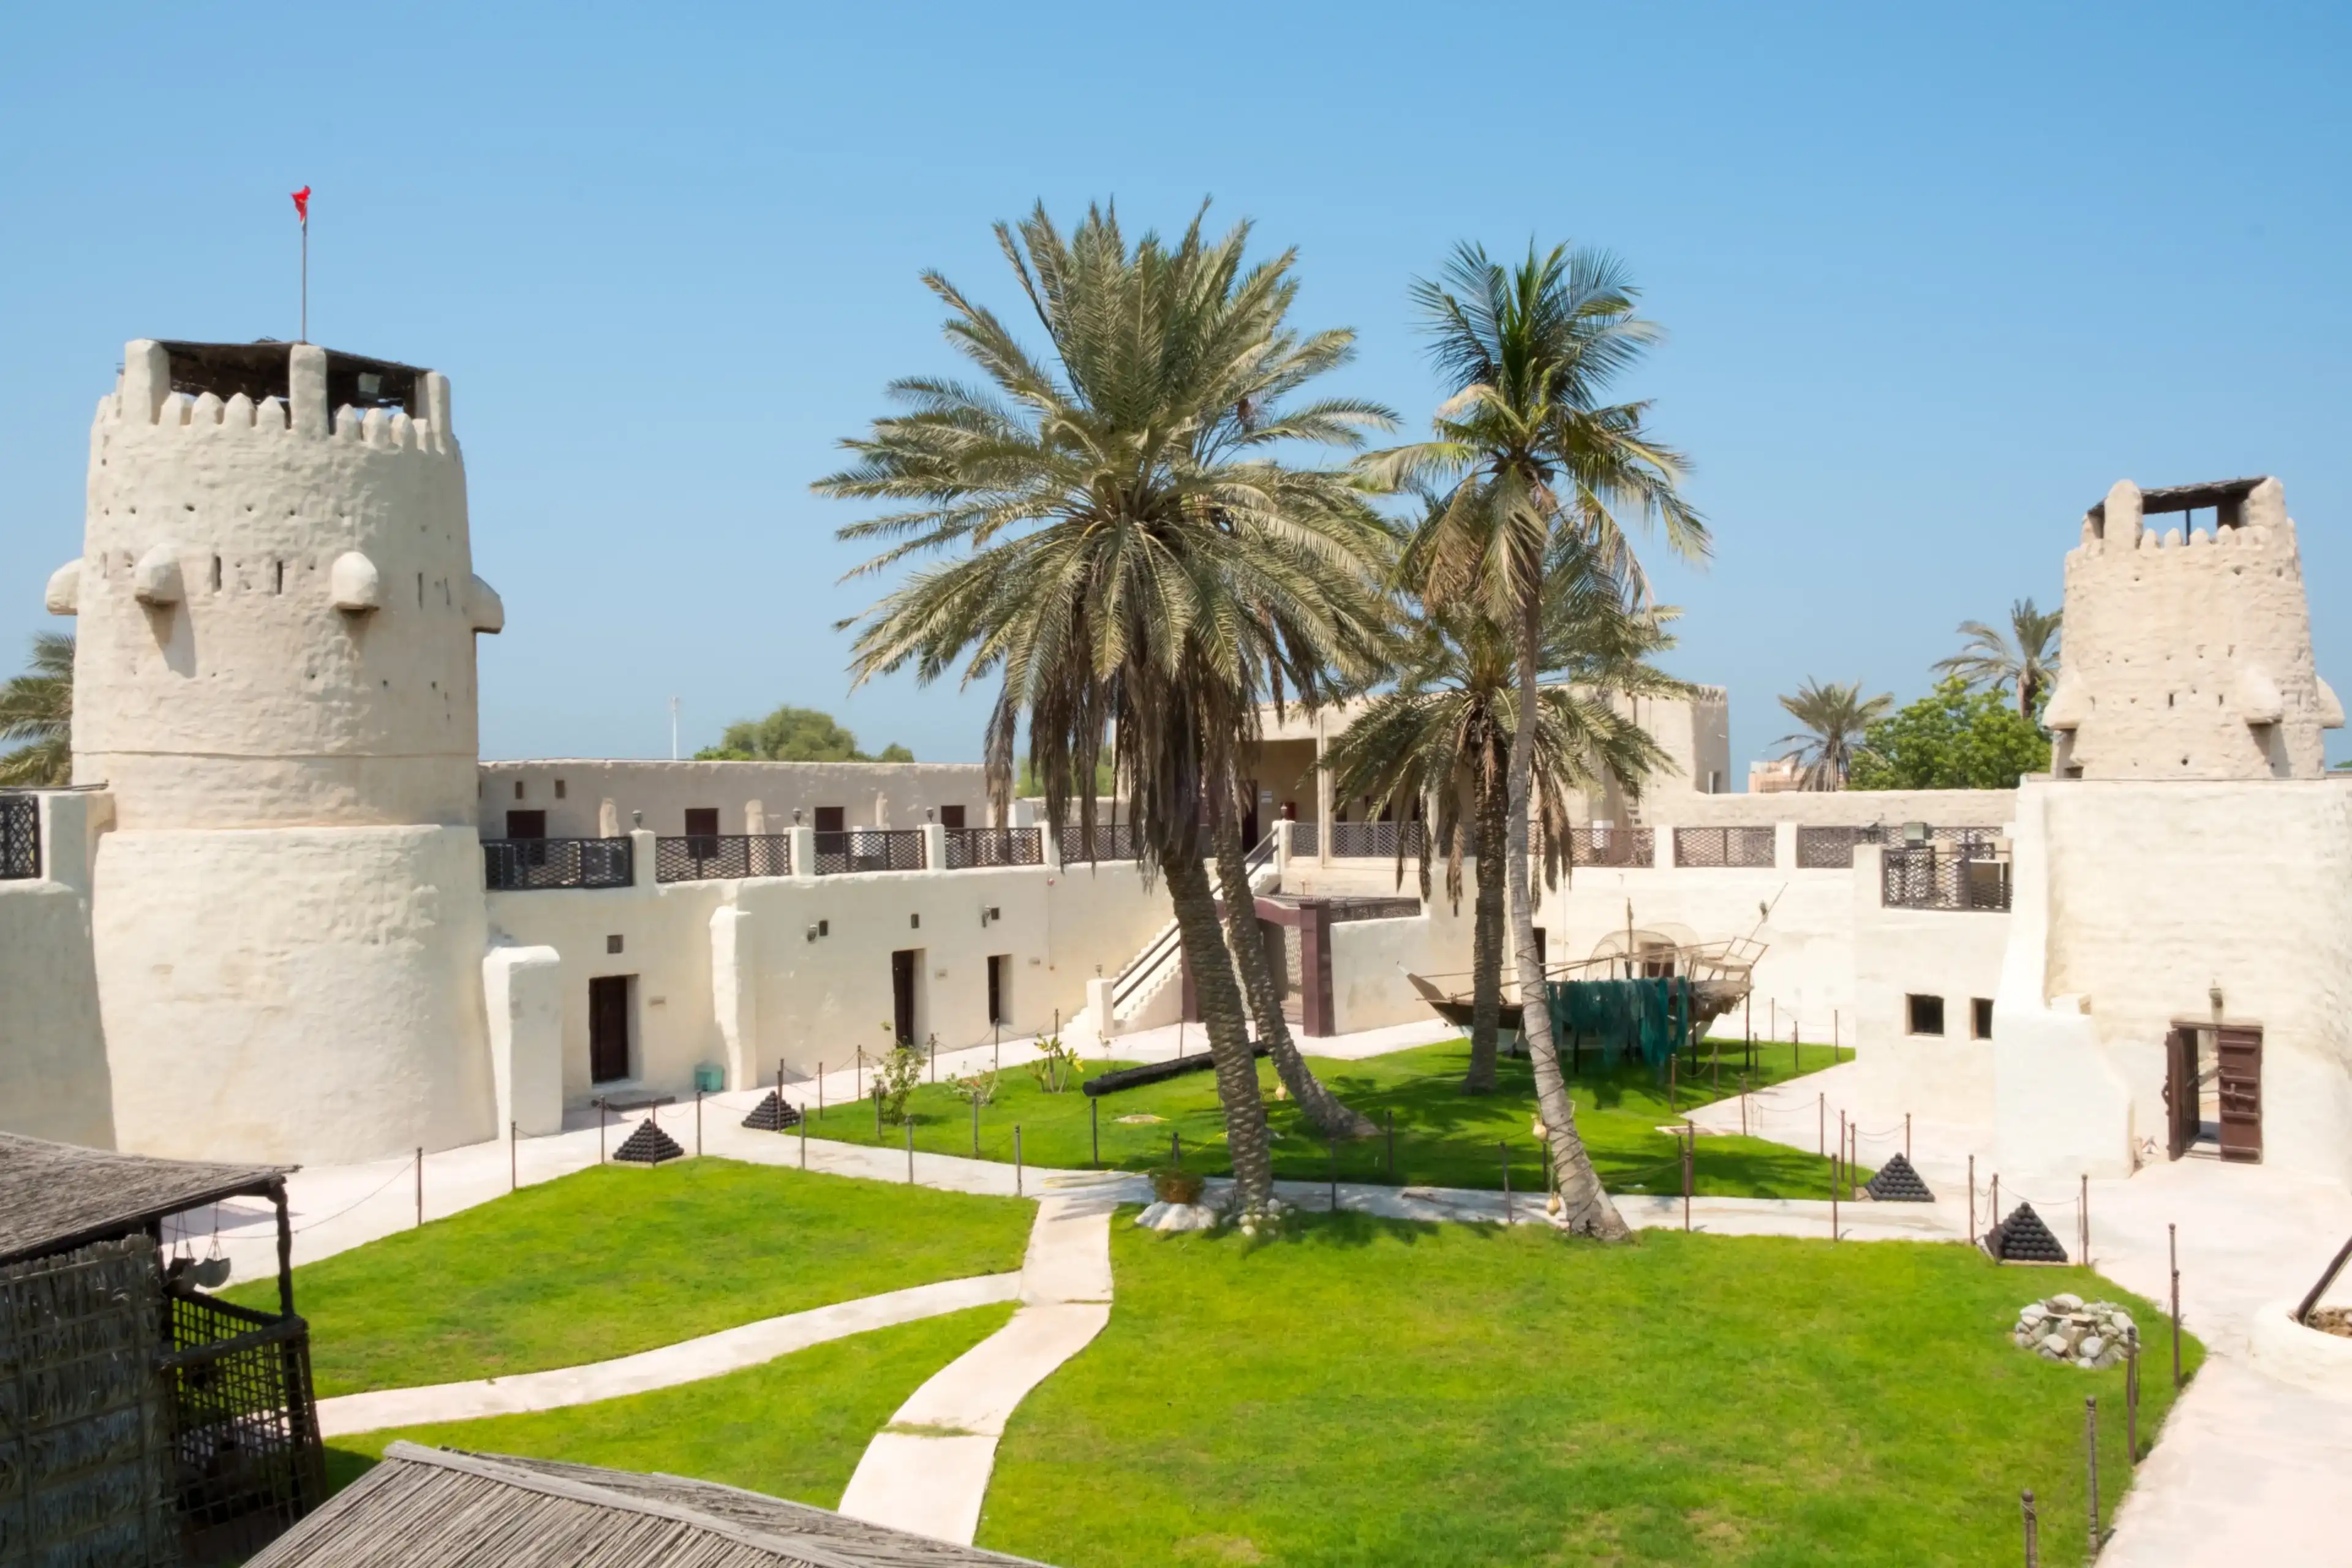 UMM AL QUWAIN, UAE - SEP 24, 2017: The museum fort in Umm Al Quwain, United Arab Emirates, Middle East.The 1768 built fort served as the local ruler's residence and seat of government until 1969.